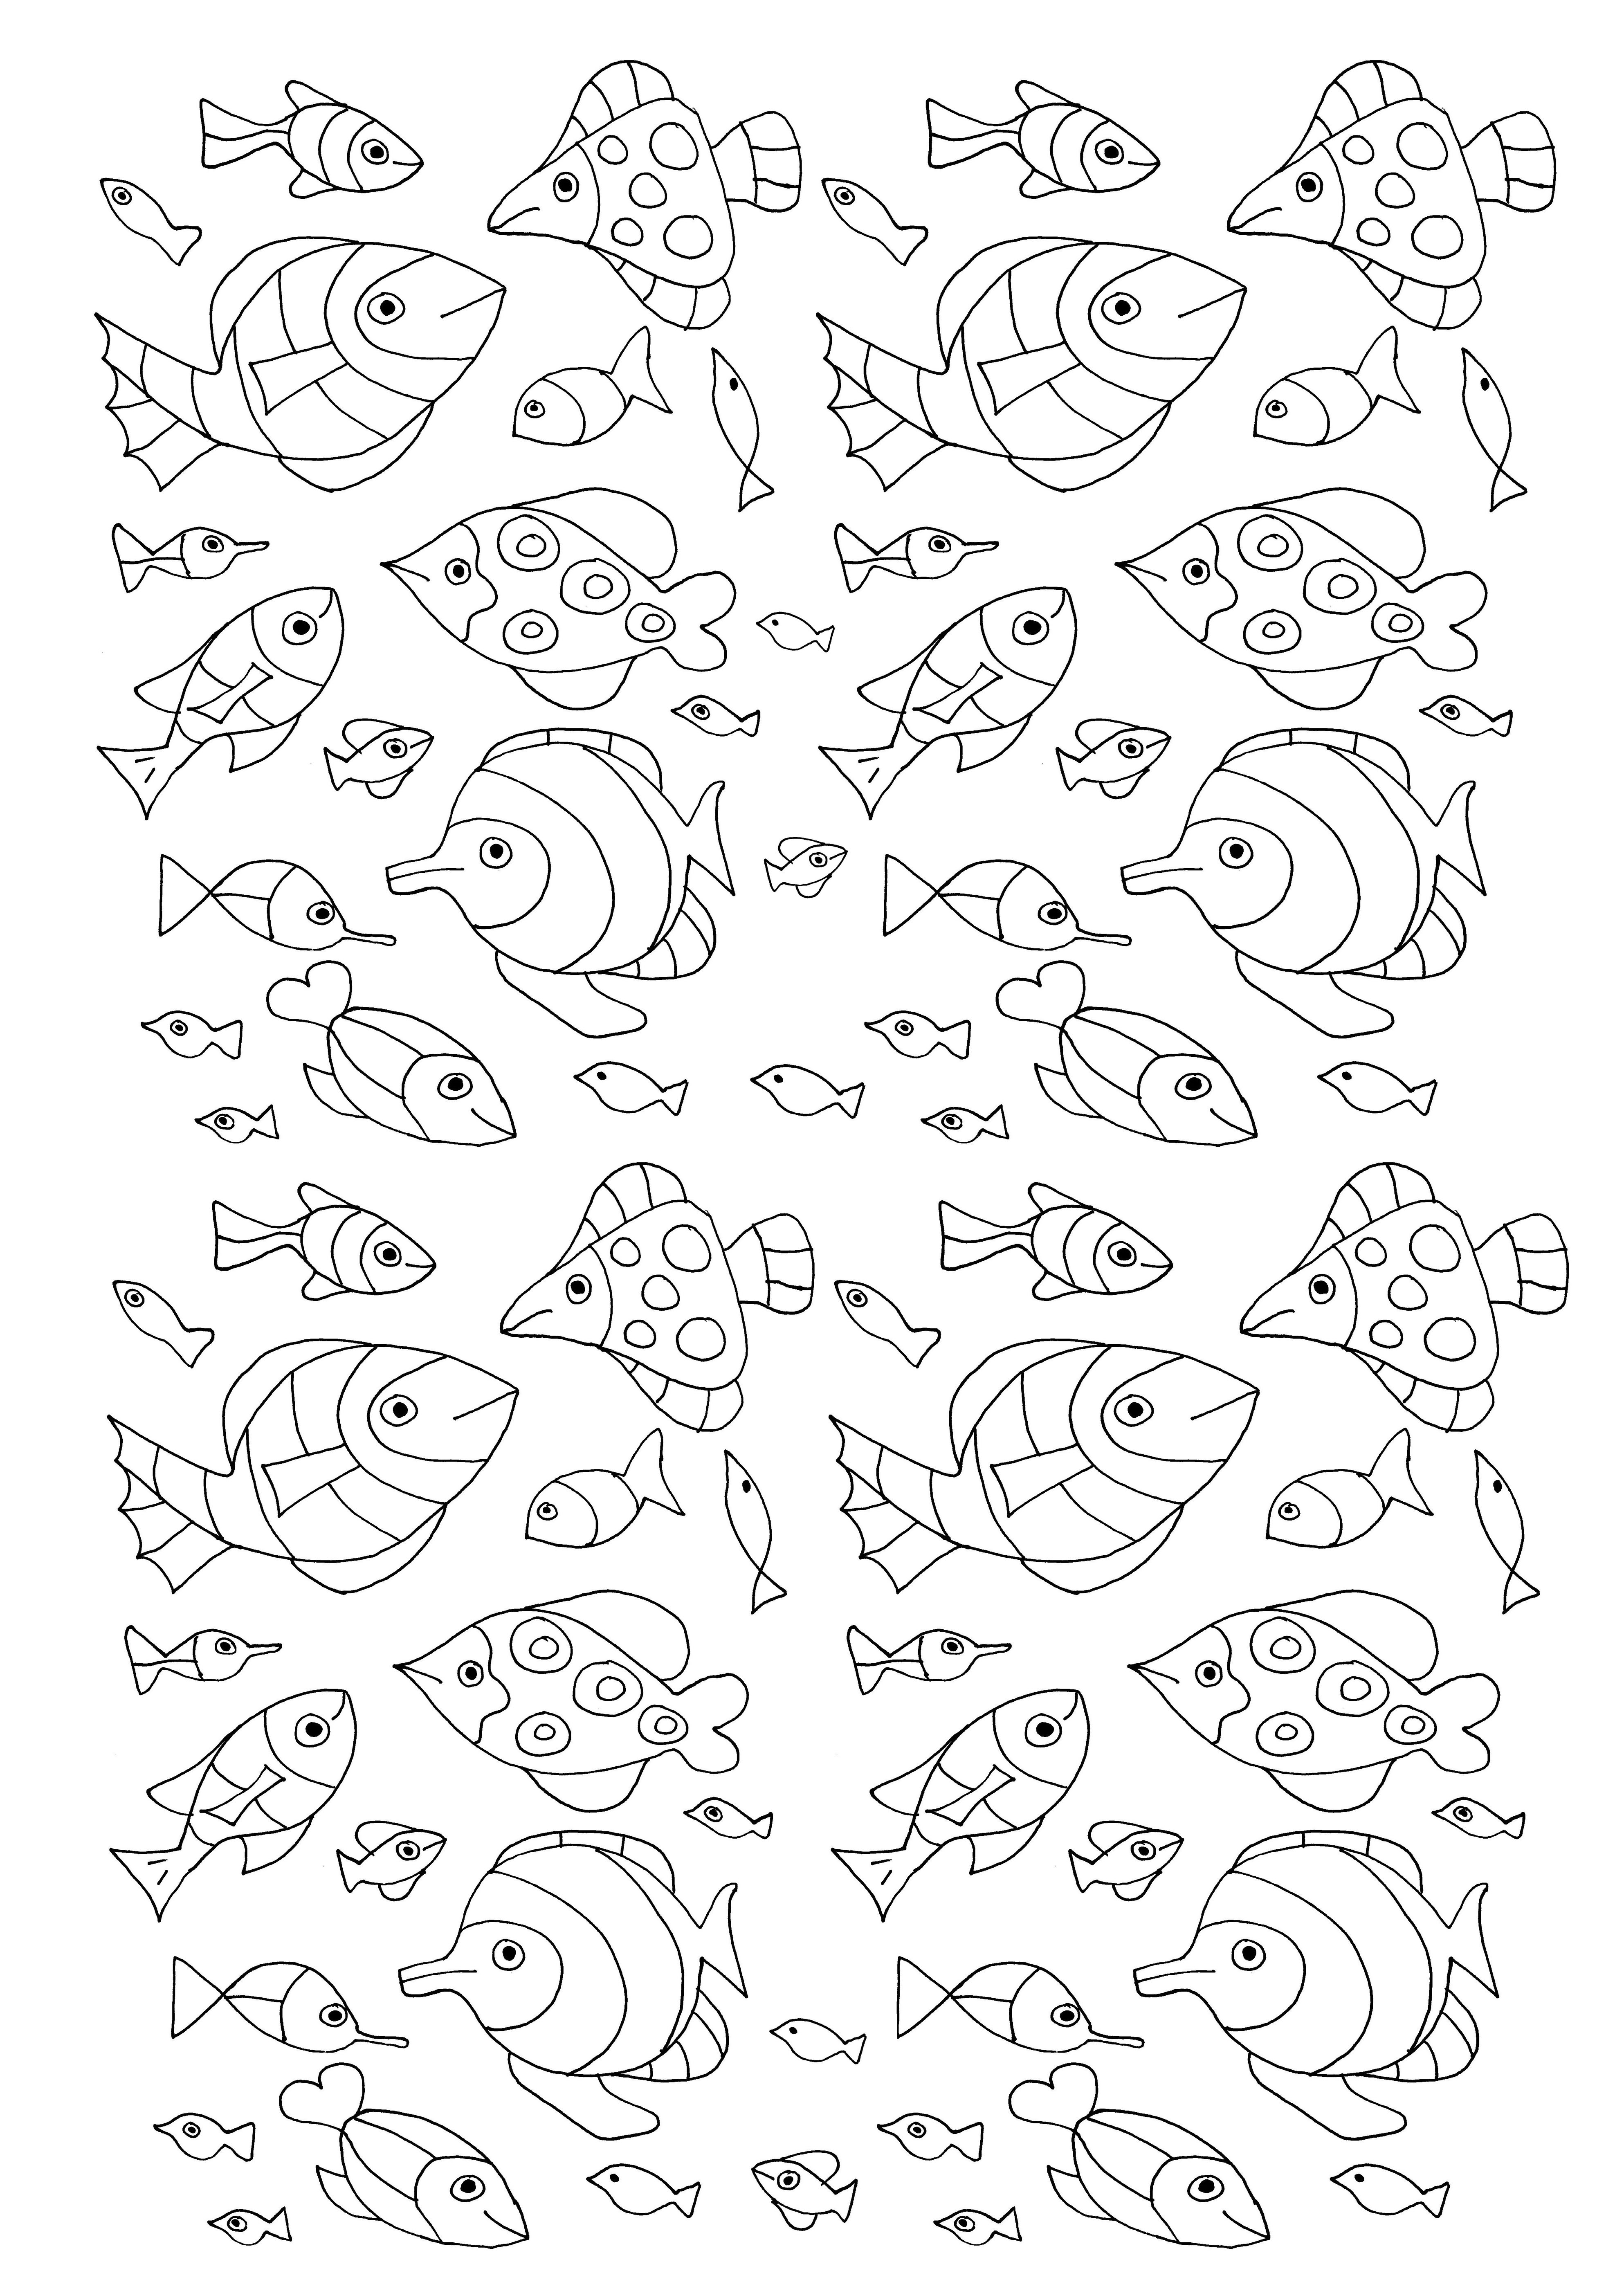 Lots of fish for aquatic coloring, Artist : Olivier